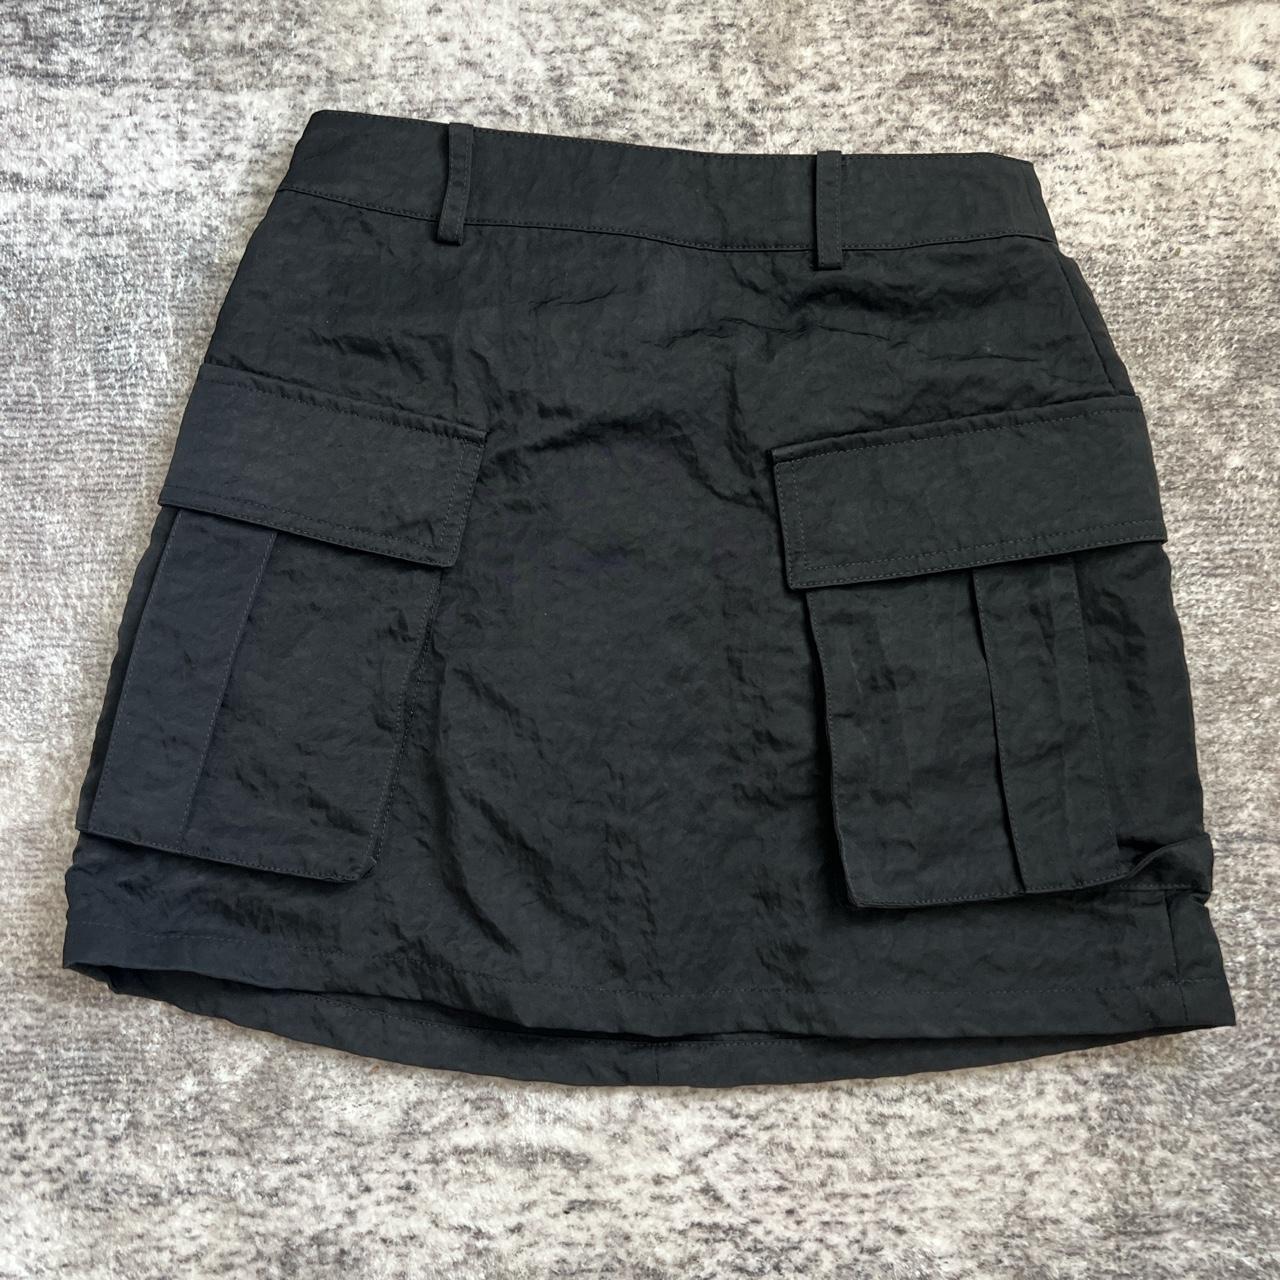 & other stories cargo skirt worn once depop pay only... - Depop